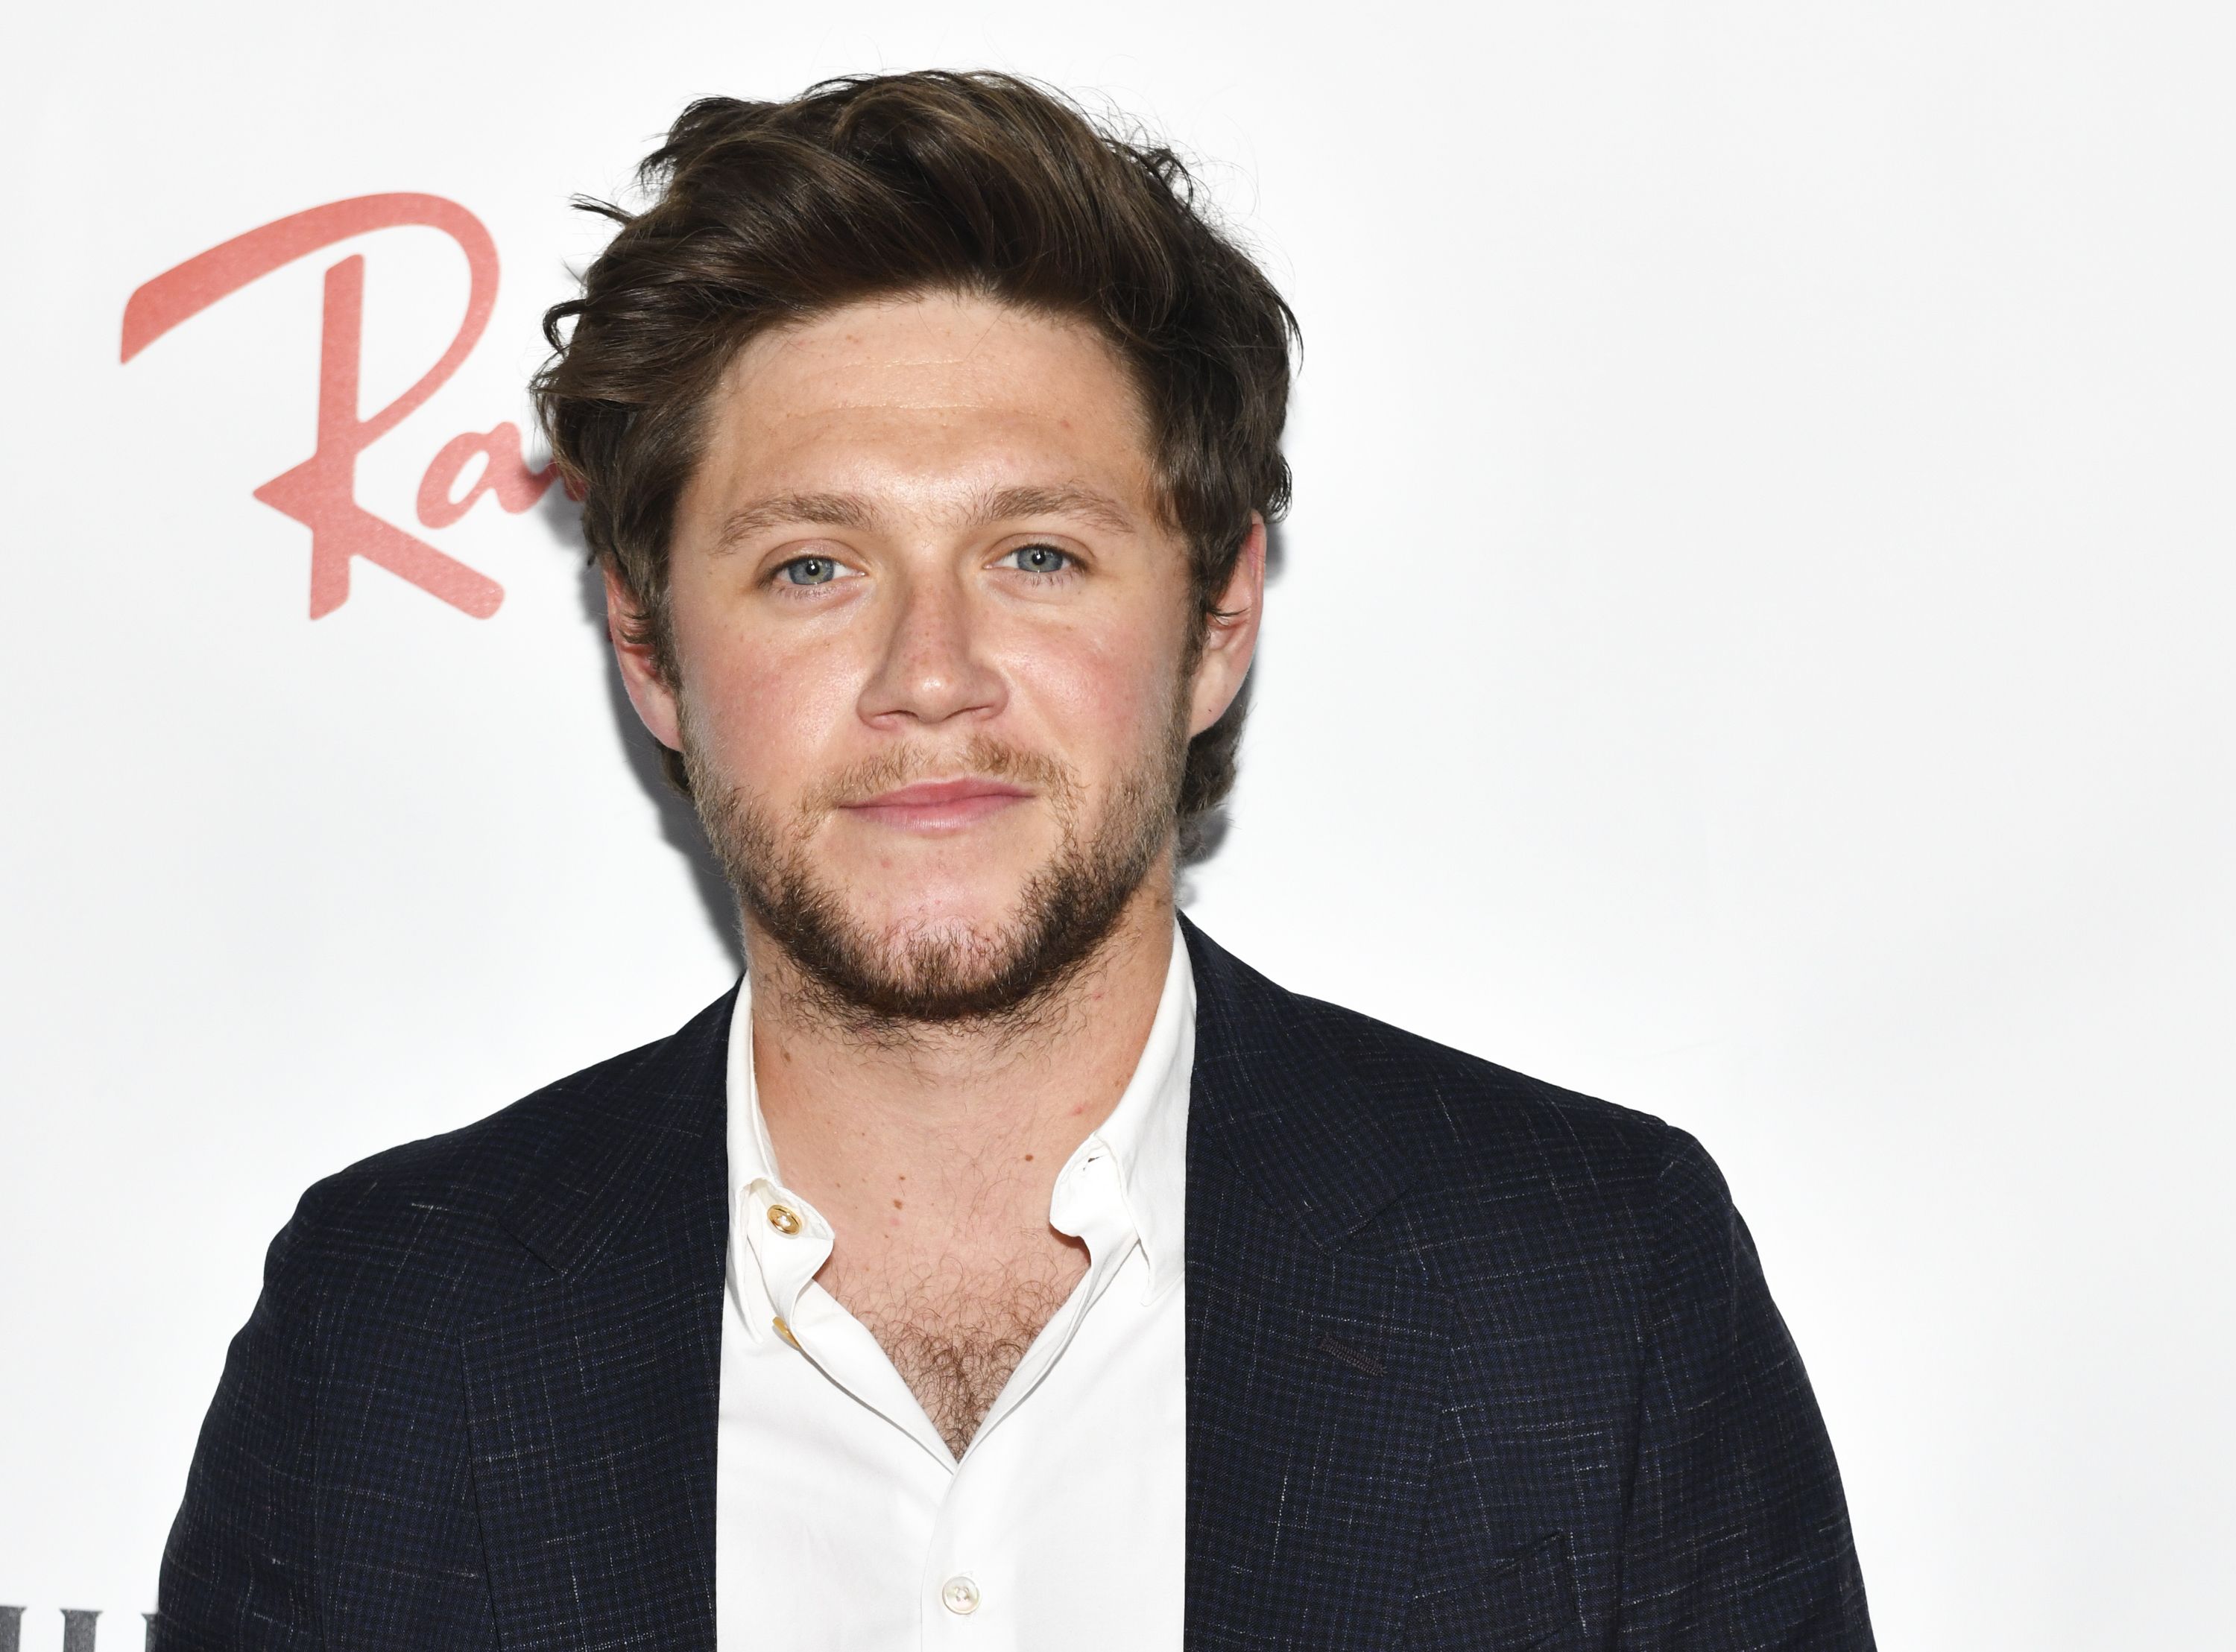 Niall Horan Might Have Dyed His Hair Blonde and His Fans Are Freaking Out